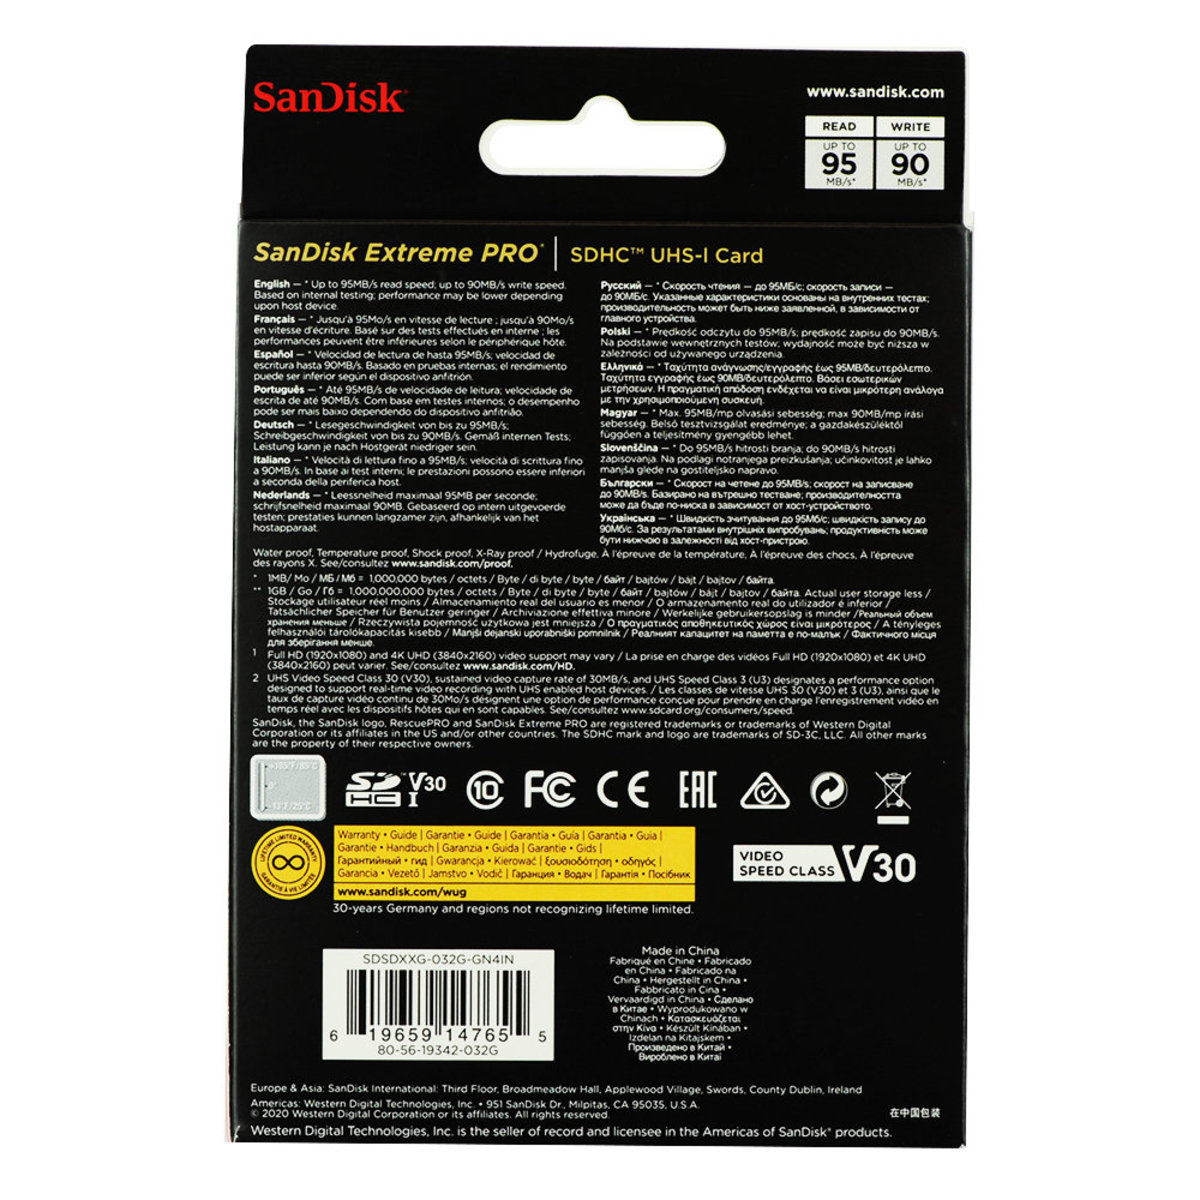 SANDISK | 32GB Extreme Pro UHS-I SDHC 記憶卡95MB/R 90MB/W (SDSDXXG-032G-GN4IN)  | HKTVmall 香港最大網購平台